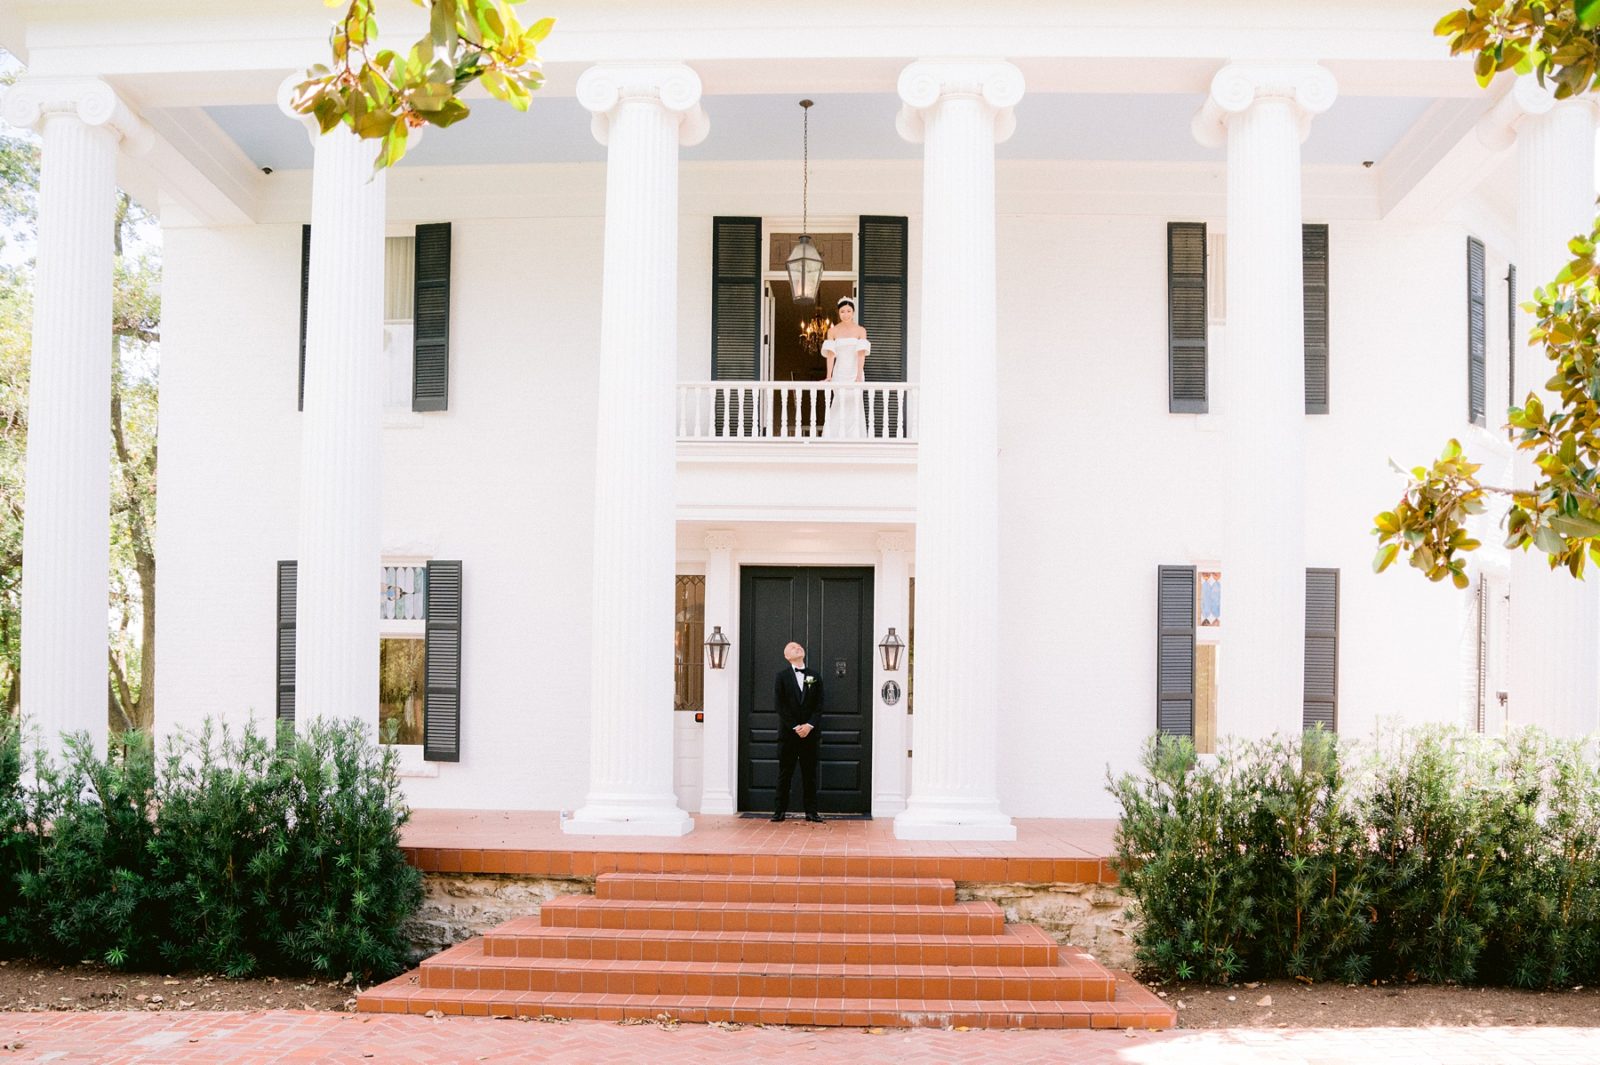 first look alternative idea, no first look at wedding, bride on balcony, fake first look, wedding first look, woodbine mansion wedding, woodbine mansion wedding details, classic austin wedding, mansion wedding venues near austin, historical wedding venue, best austin wedding venues, austin wedding photographer, hill country wedding, round rock wedding venue